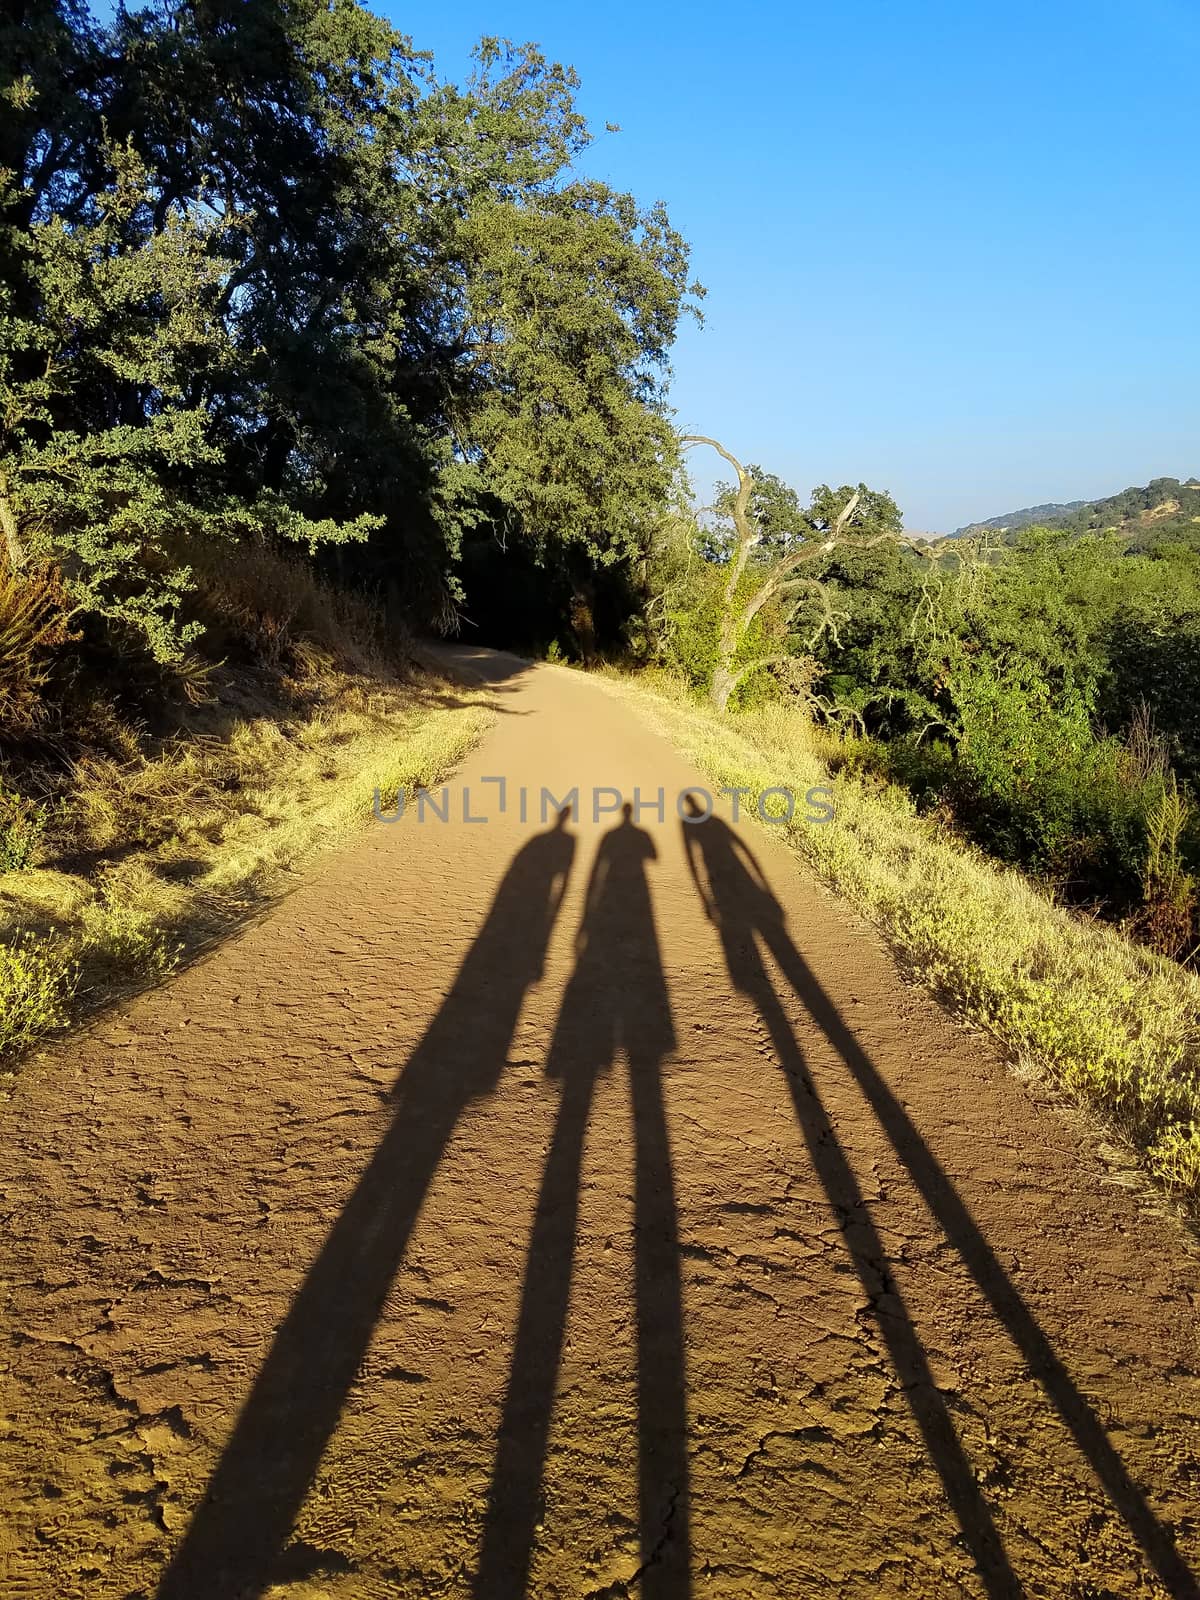 Long shadows of three people on the dirt road that leads into the wood.